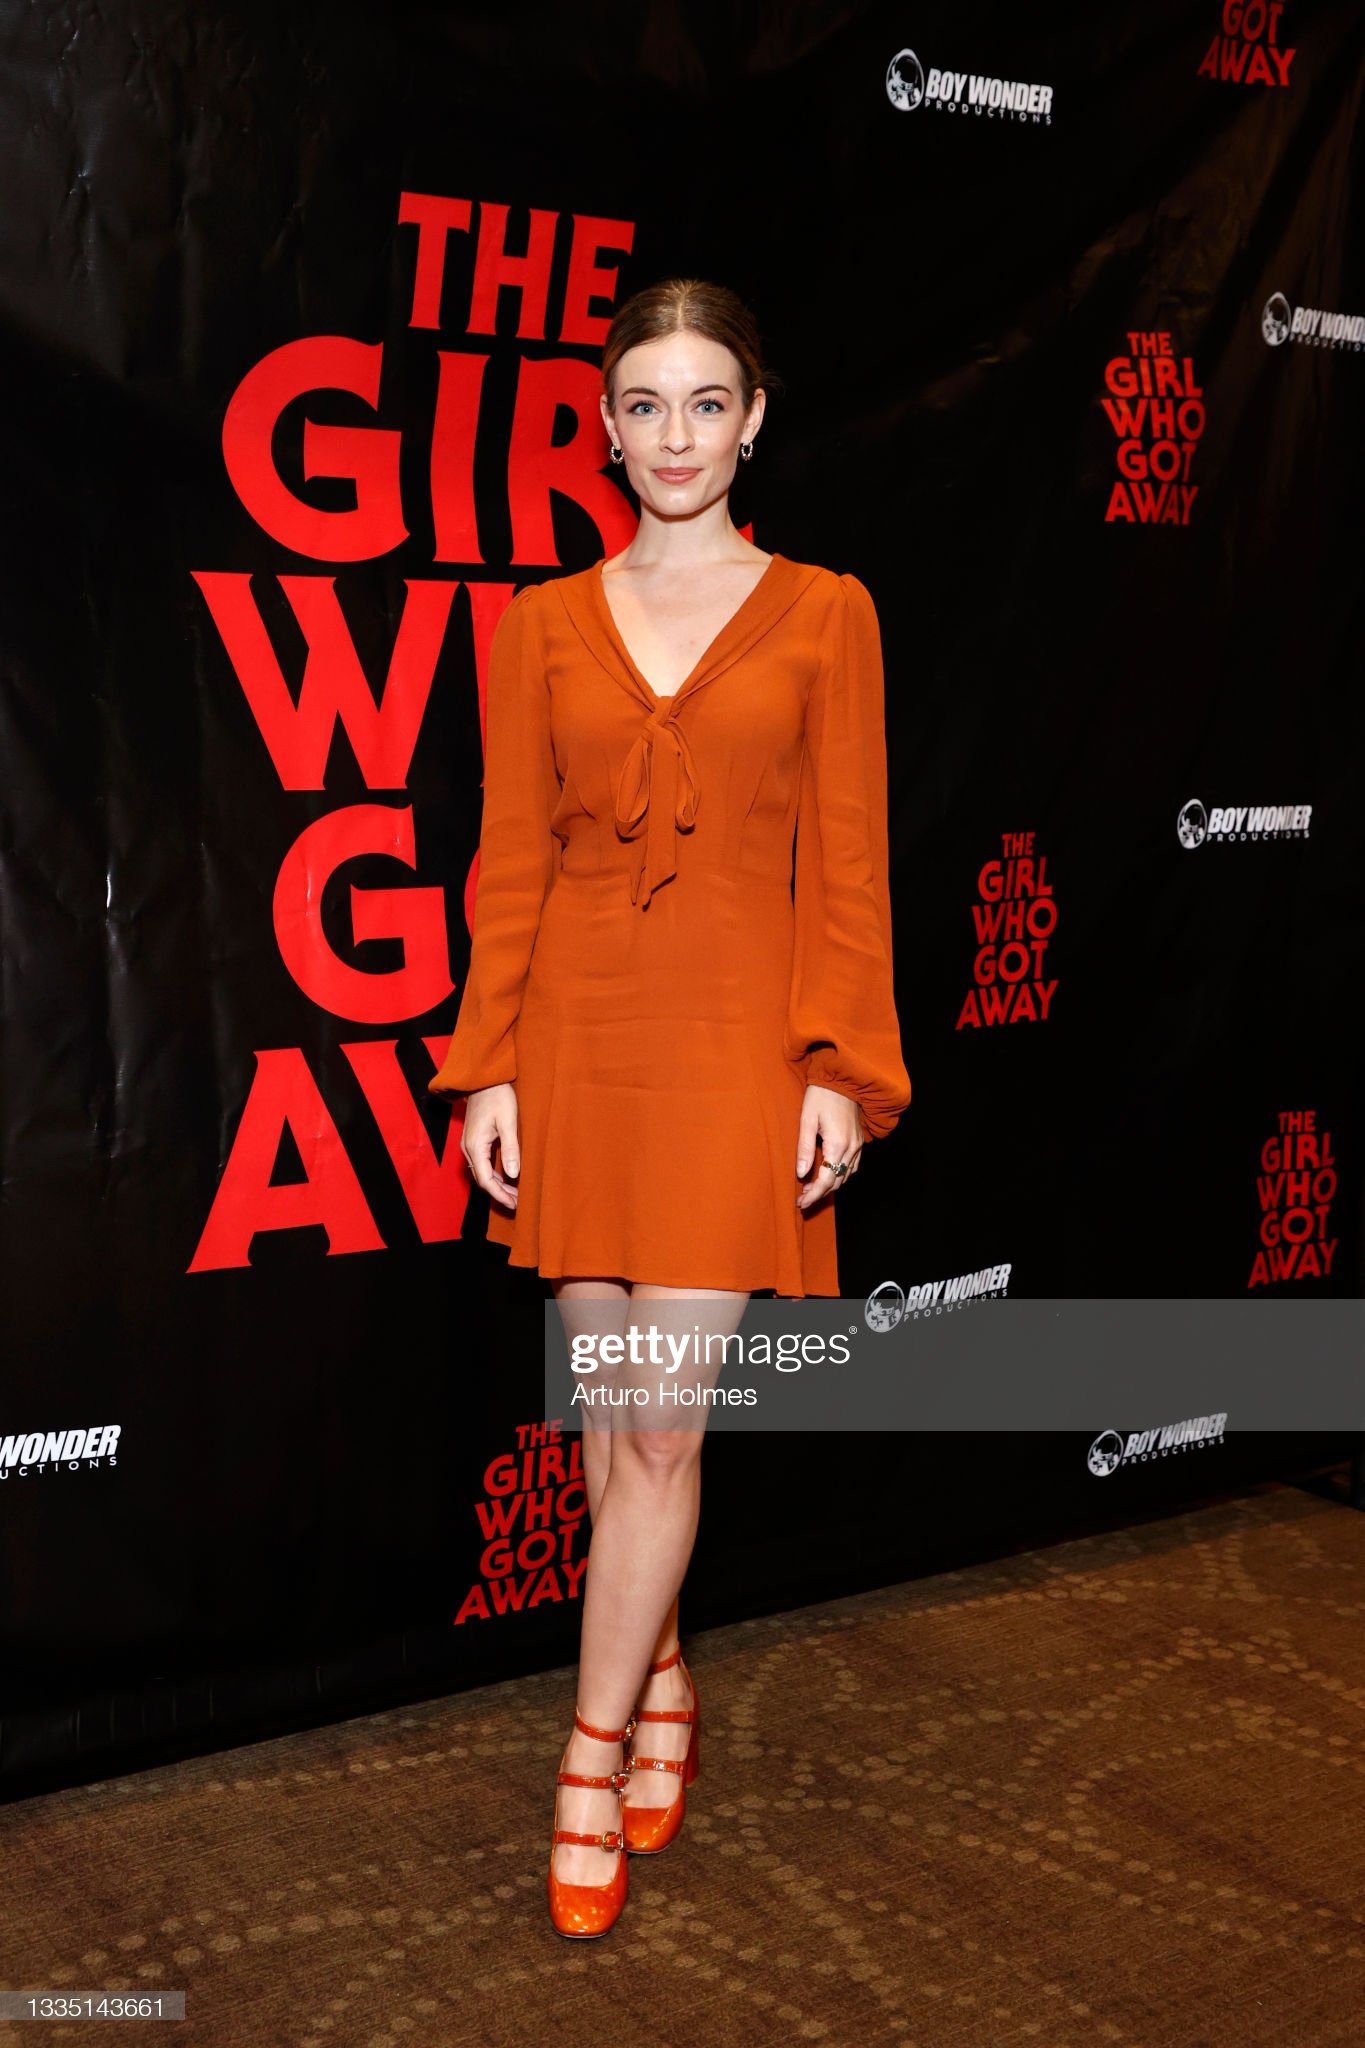 gettyimages-1335143661-2048x2048.jpg